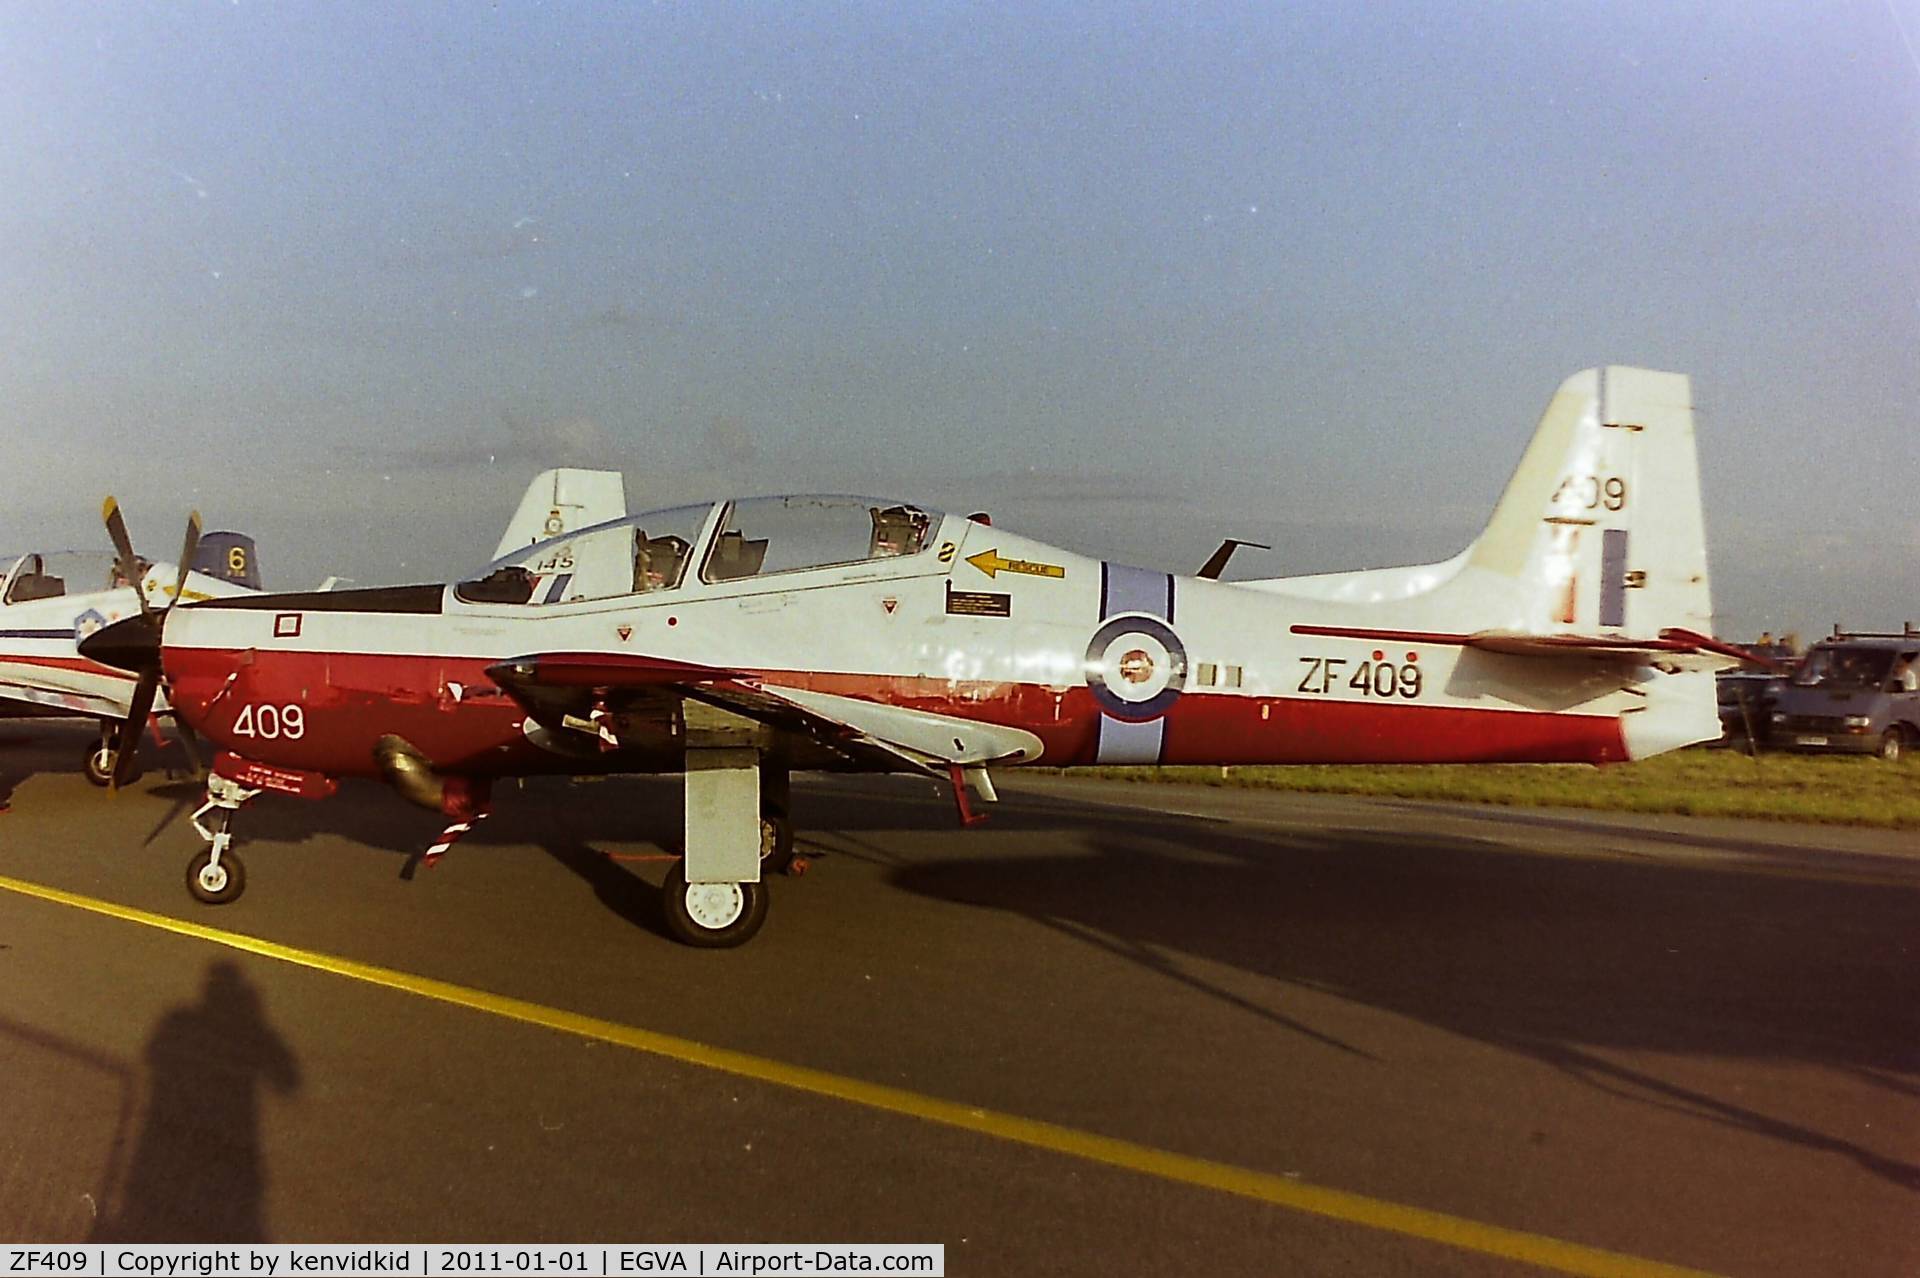 ZF409, 1992 Short S-312 Tucano T1 C/N S128/T99, At RIAT 1993, scanned from negative.